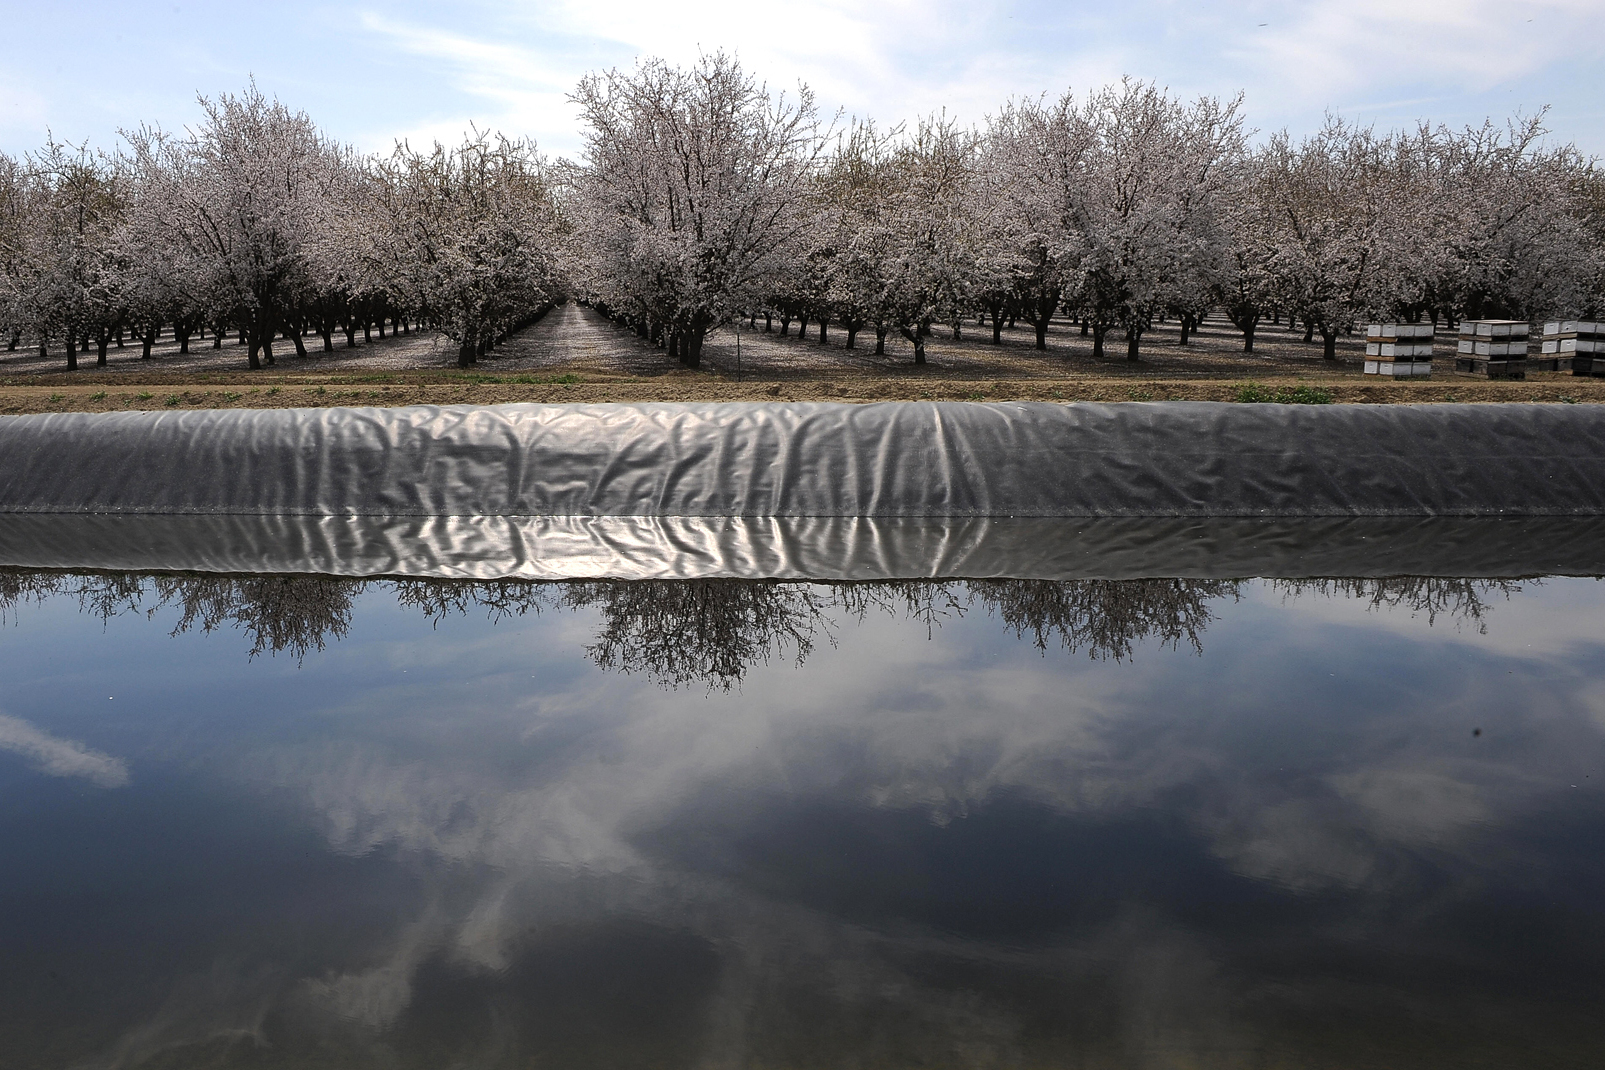 A field of almond trees is reflected in an irrigation canal in Firebaugh, Calif., in the San Joaquin Valley in 2009. The Almond Board of California says that in the past two decades, the industry has reduced its water consumption by 33 percent per pound of almonds produced. Photo: Robyn Beck/AFP/Getty Images